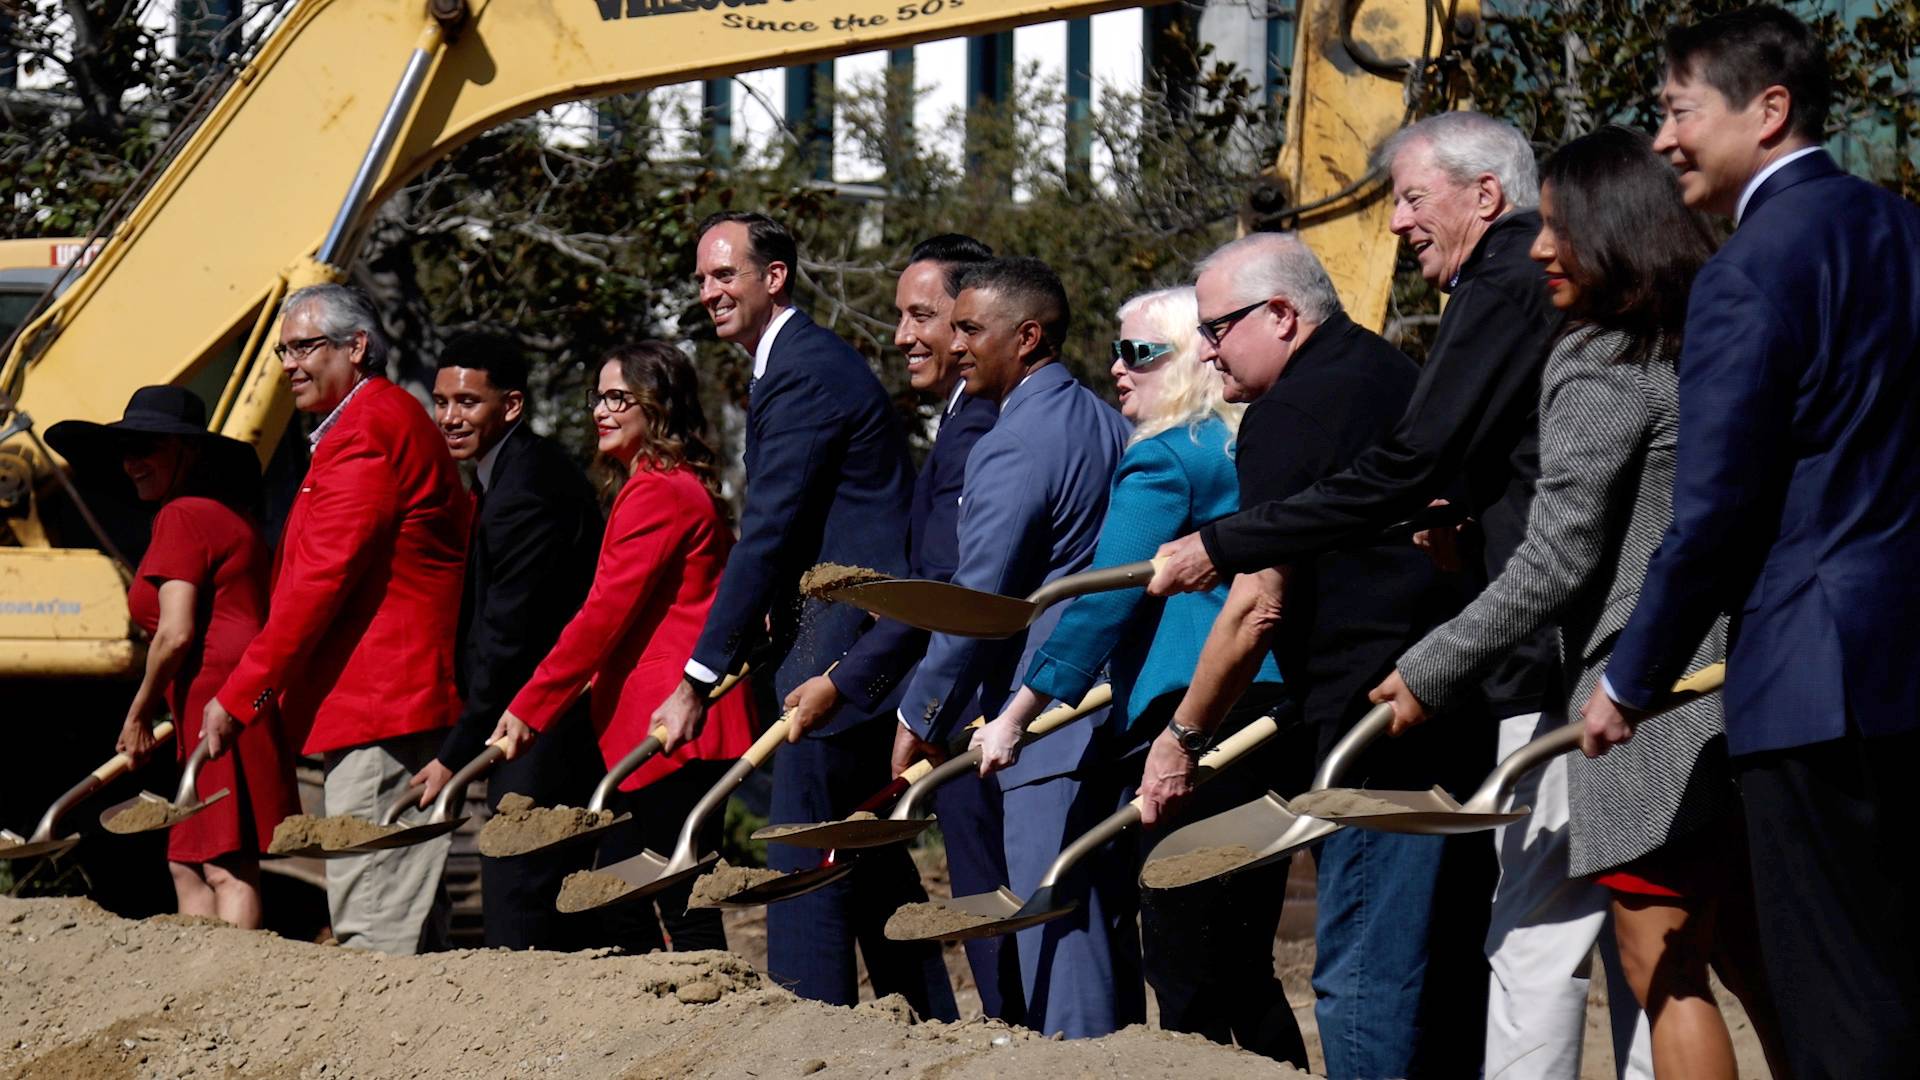 10 people shovel dirt at a groundbreaking event